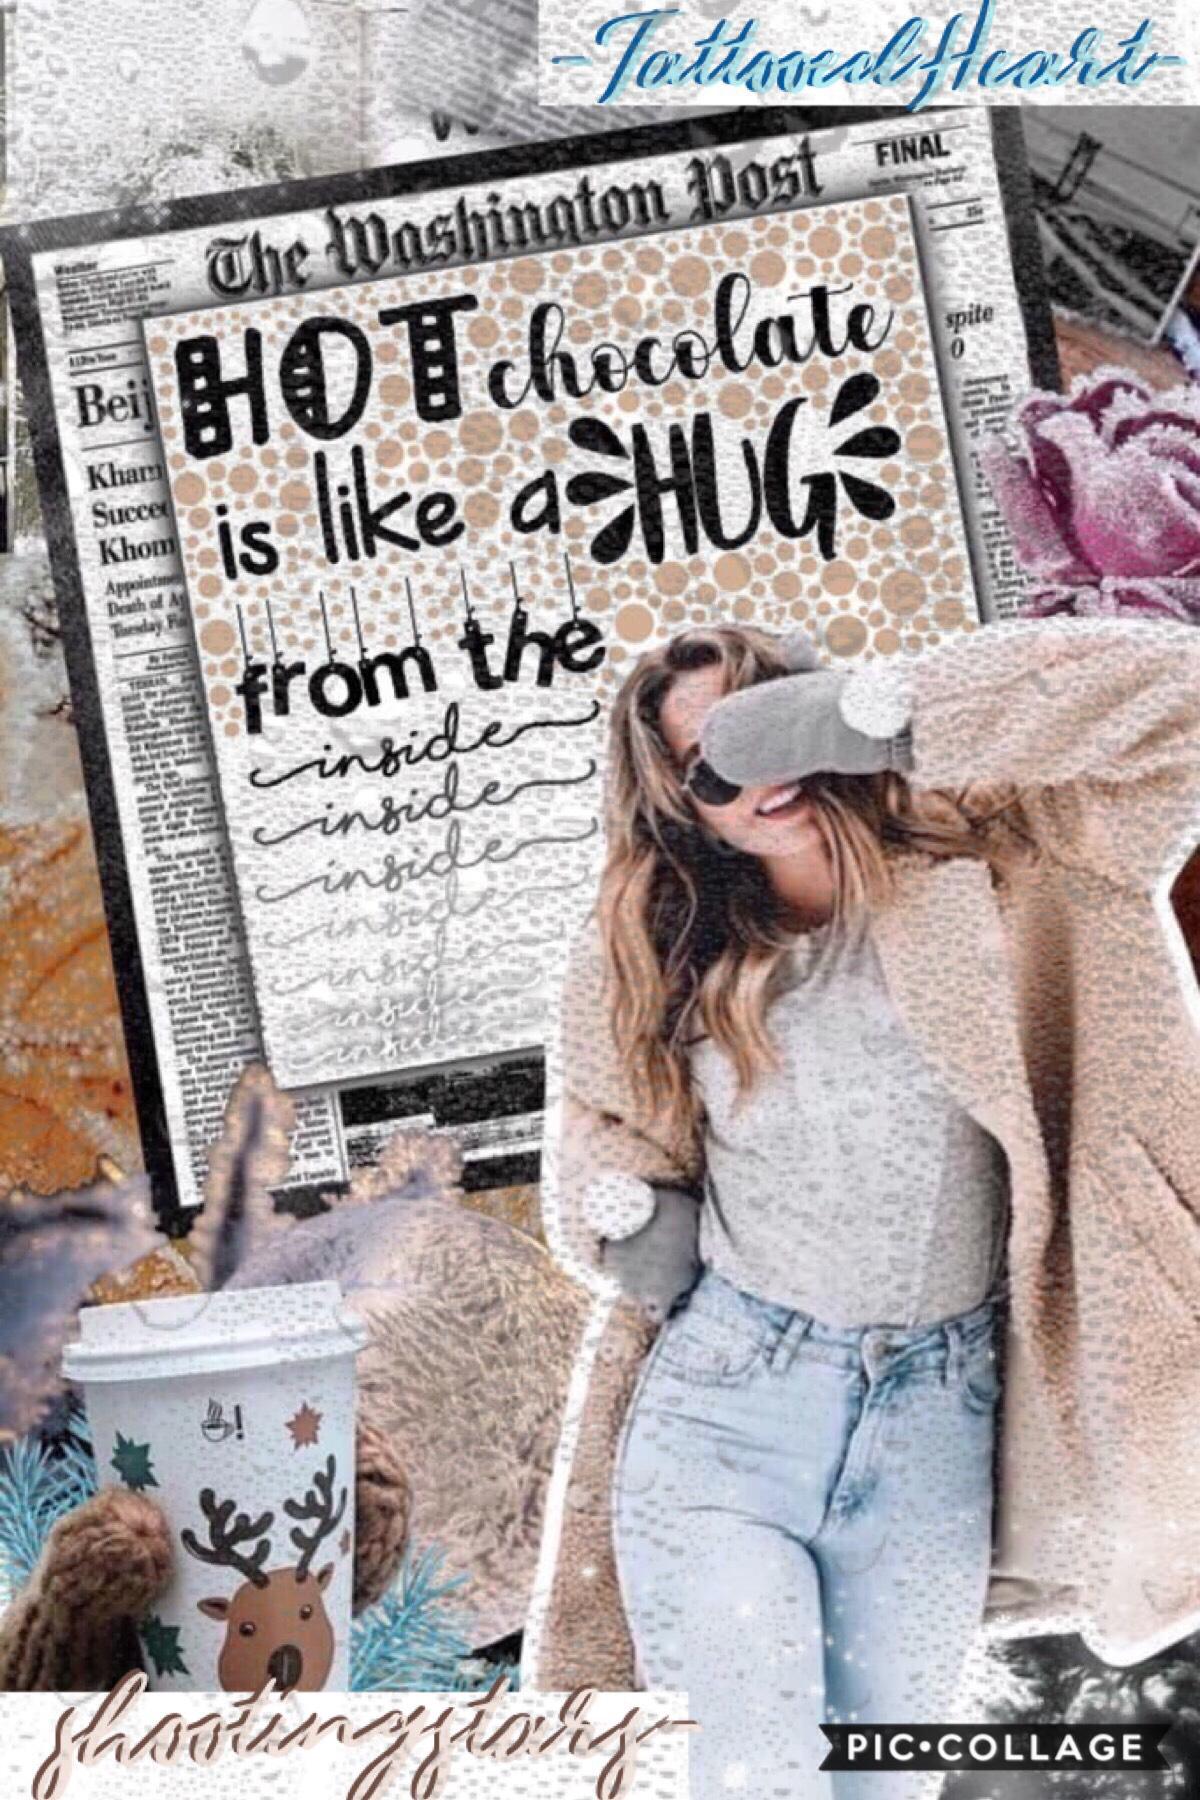 collab with my friend in real life, mika💓🌸go follow her she’s very talented and odd😏🌻🌼it’s literally summer rn, and if you drank hot chocolate here, you would probably half die 😂☀️🍦also love this very true quote🌿feel free to ask me for an icon or collab🤪💫